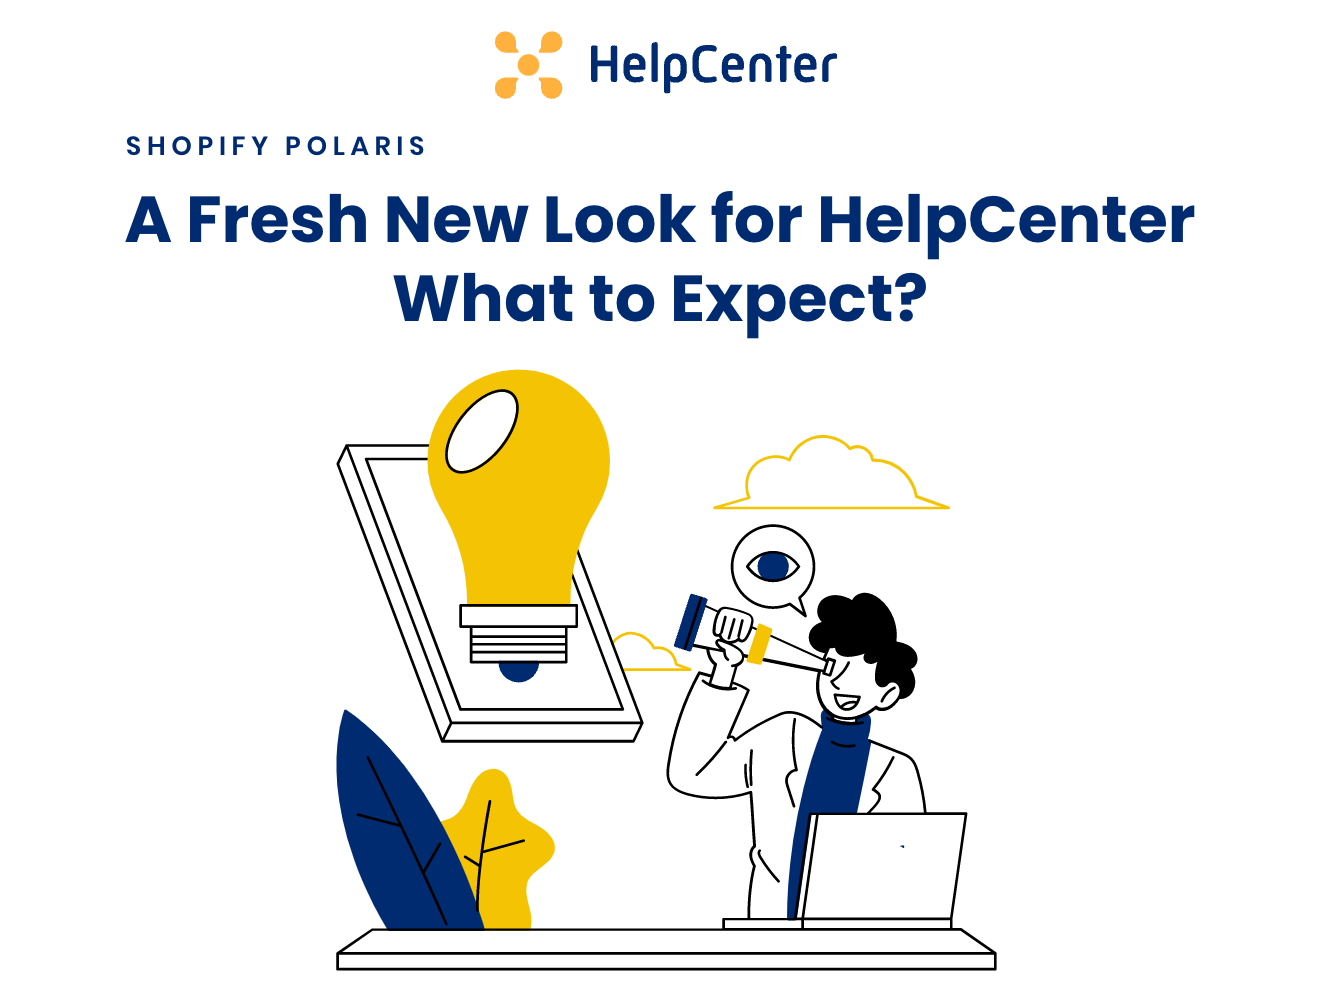 Shopify Polaris: A Fresh New Look for HelpCenter – What to Expect?